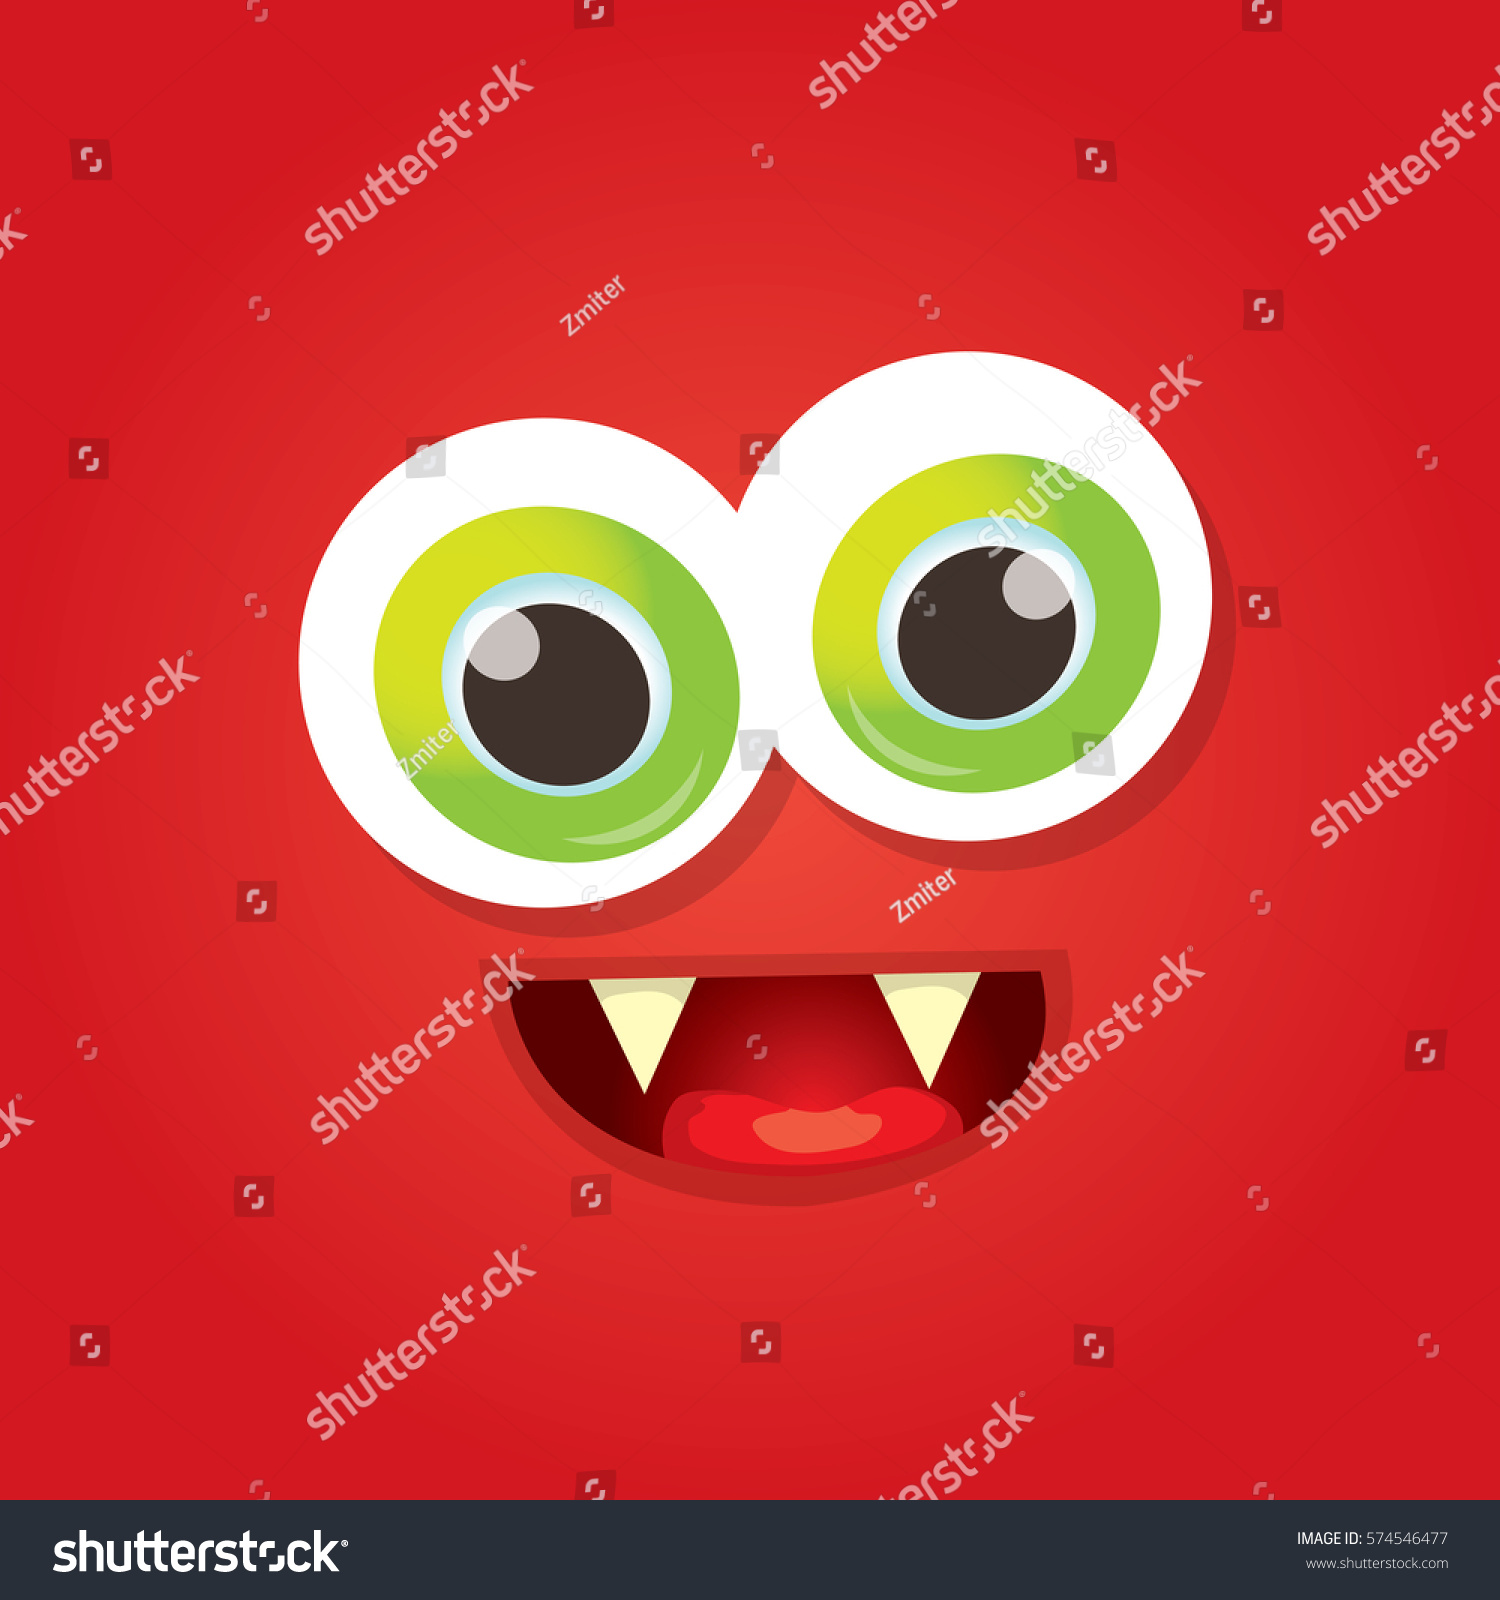 vector red funny monster face. cartoon monster smiling face for kids background or greeting cards #574546477